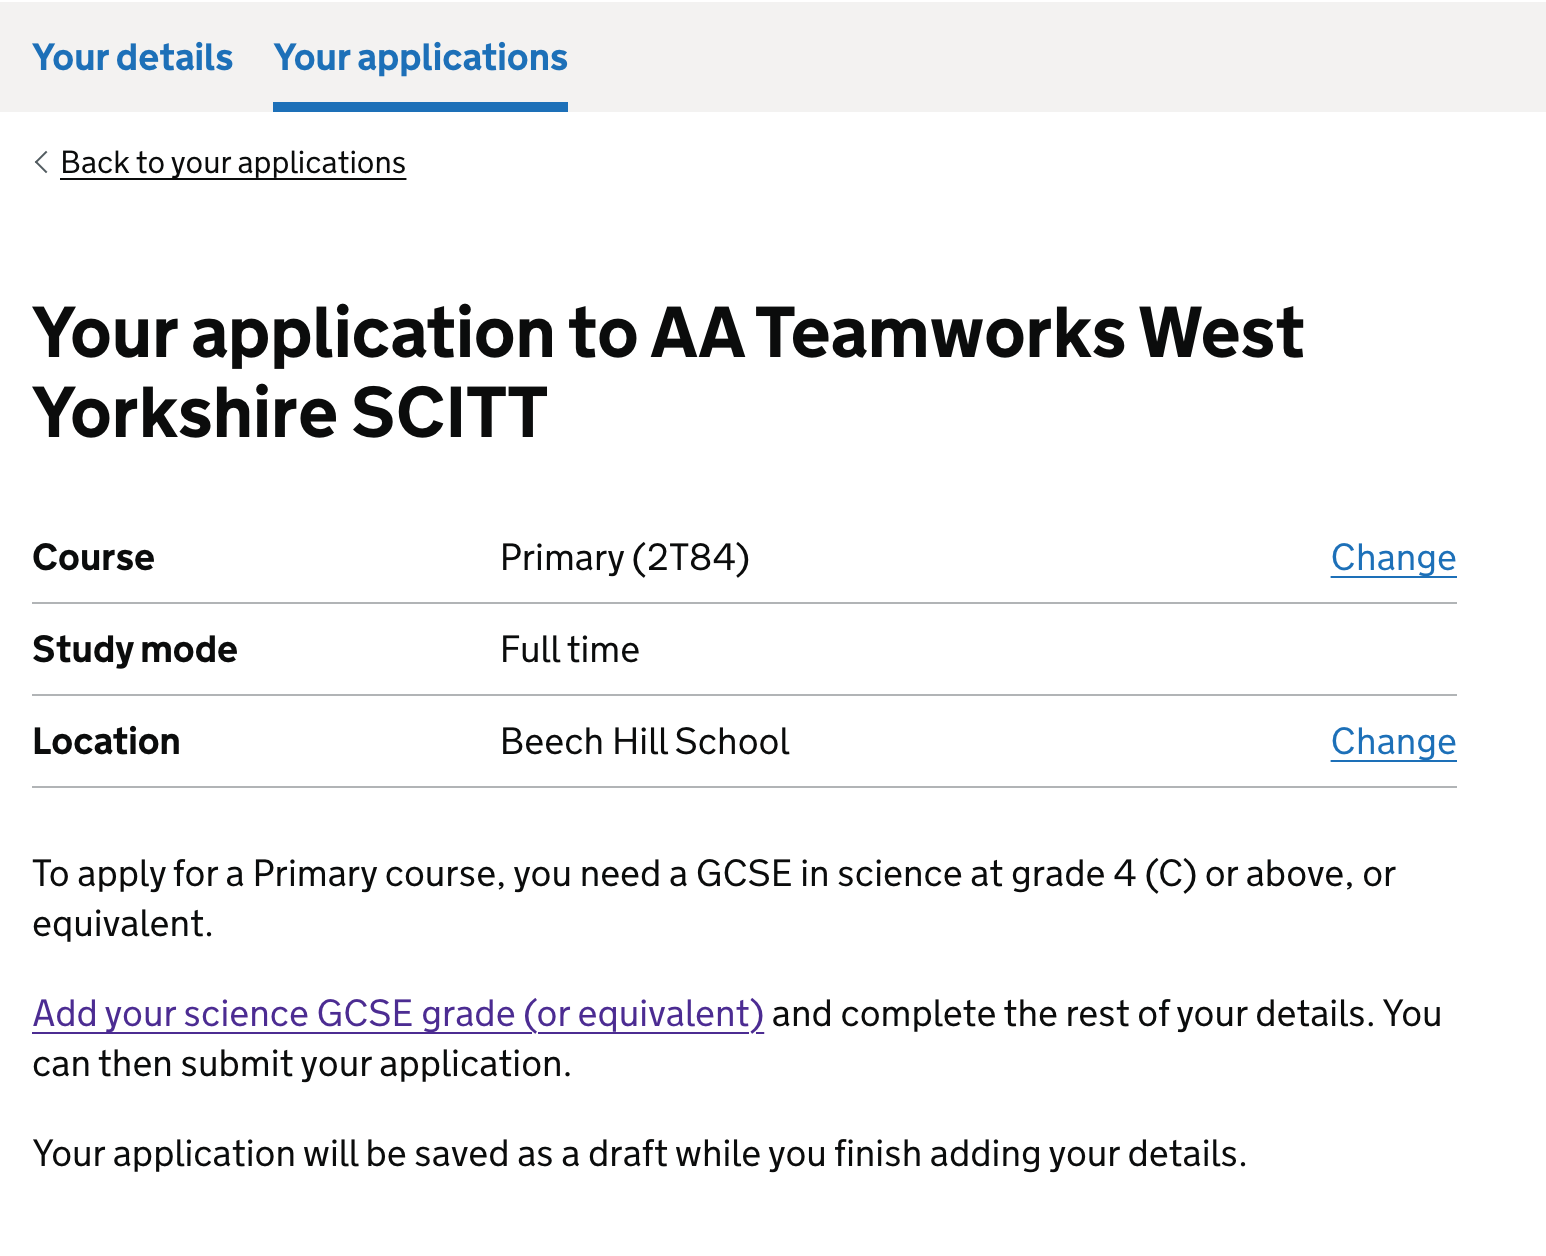 Screenshot of the summary of the provider and course a candidate is applying to in a summary list. Below this is content telling the candidate they cannot submit their application because they need to add information about their science GCSE or equivalent and finsih their other details.